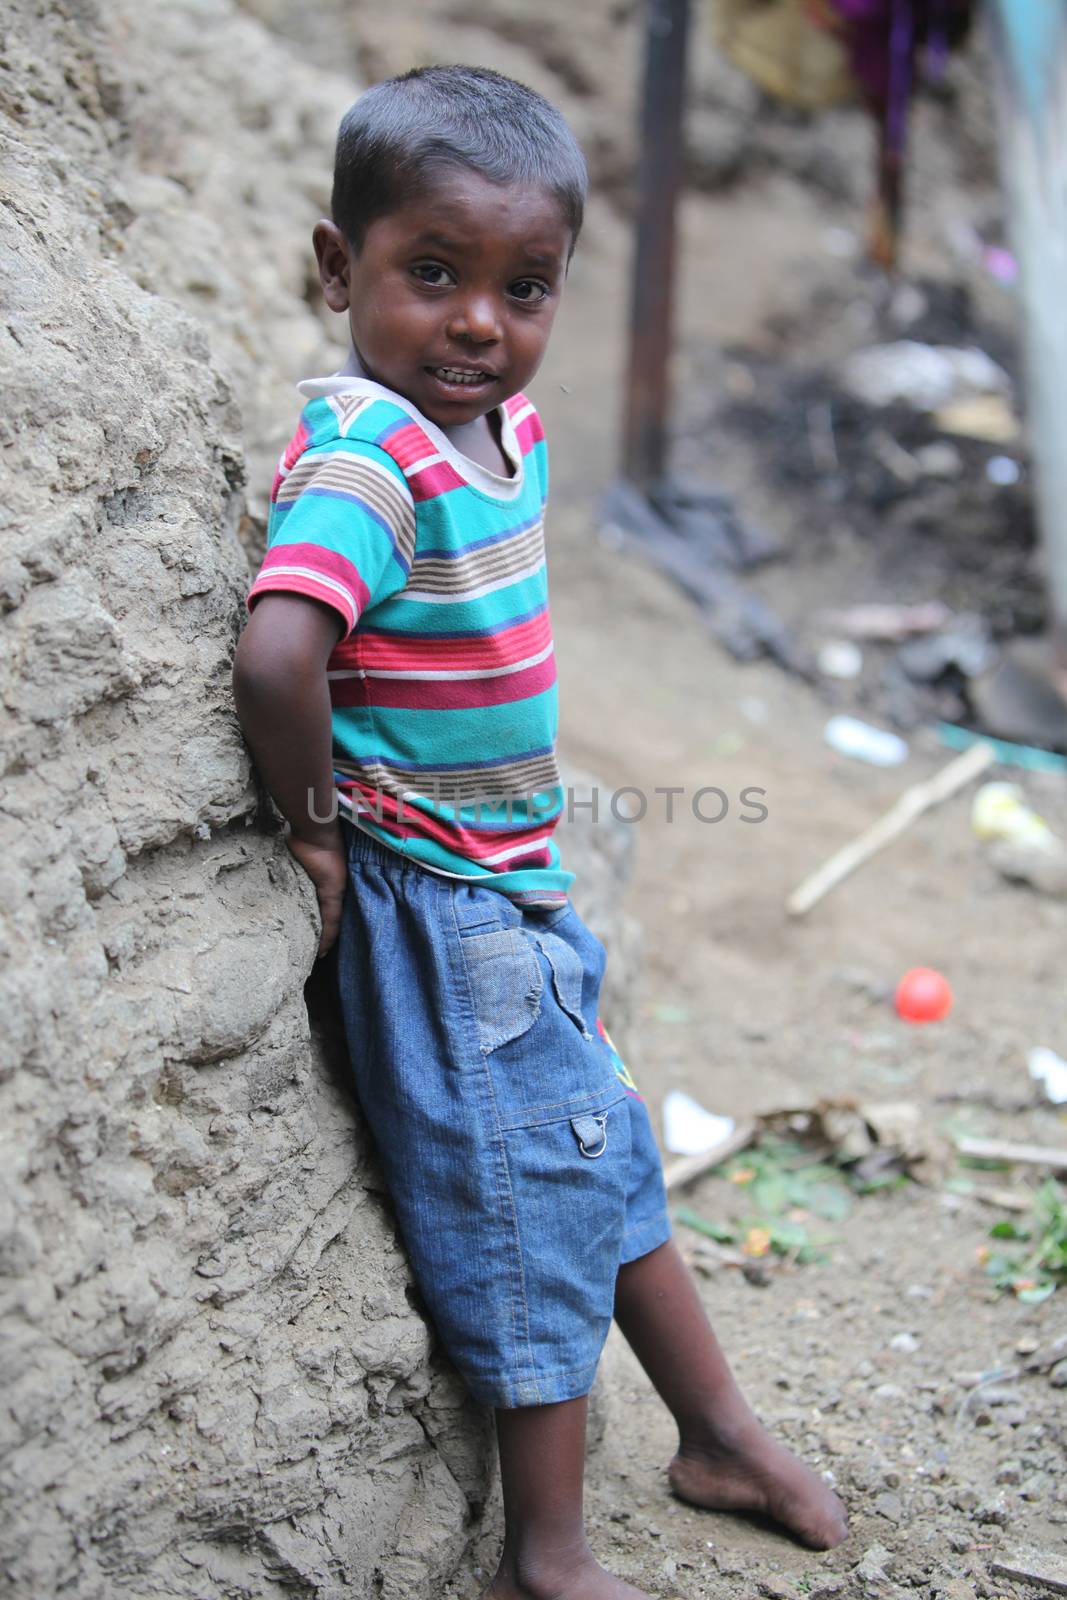 Pune, India - July 16, 2015: A poor Indian boy standing at a construction site where his parents work in India